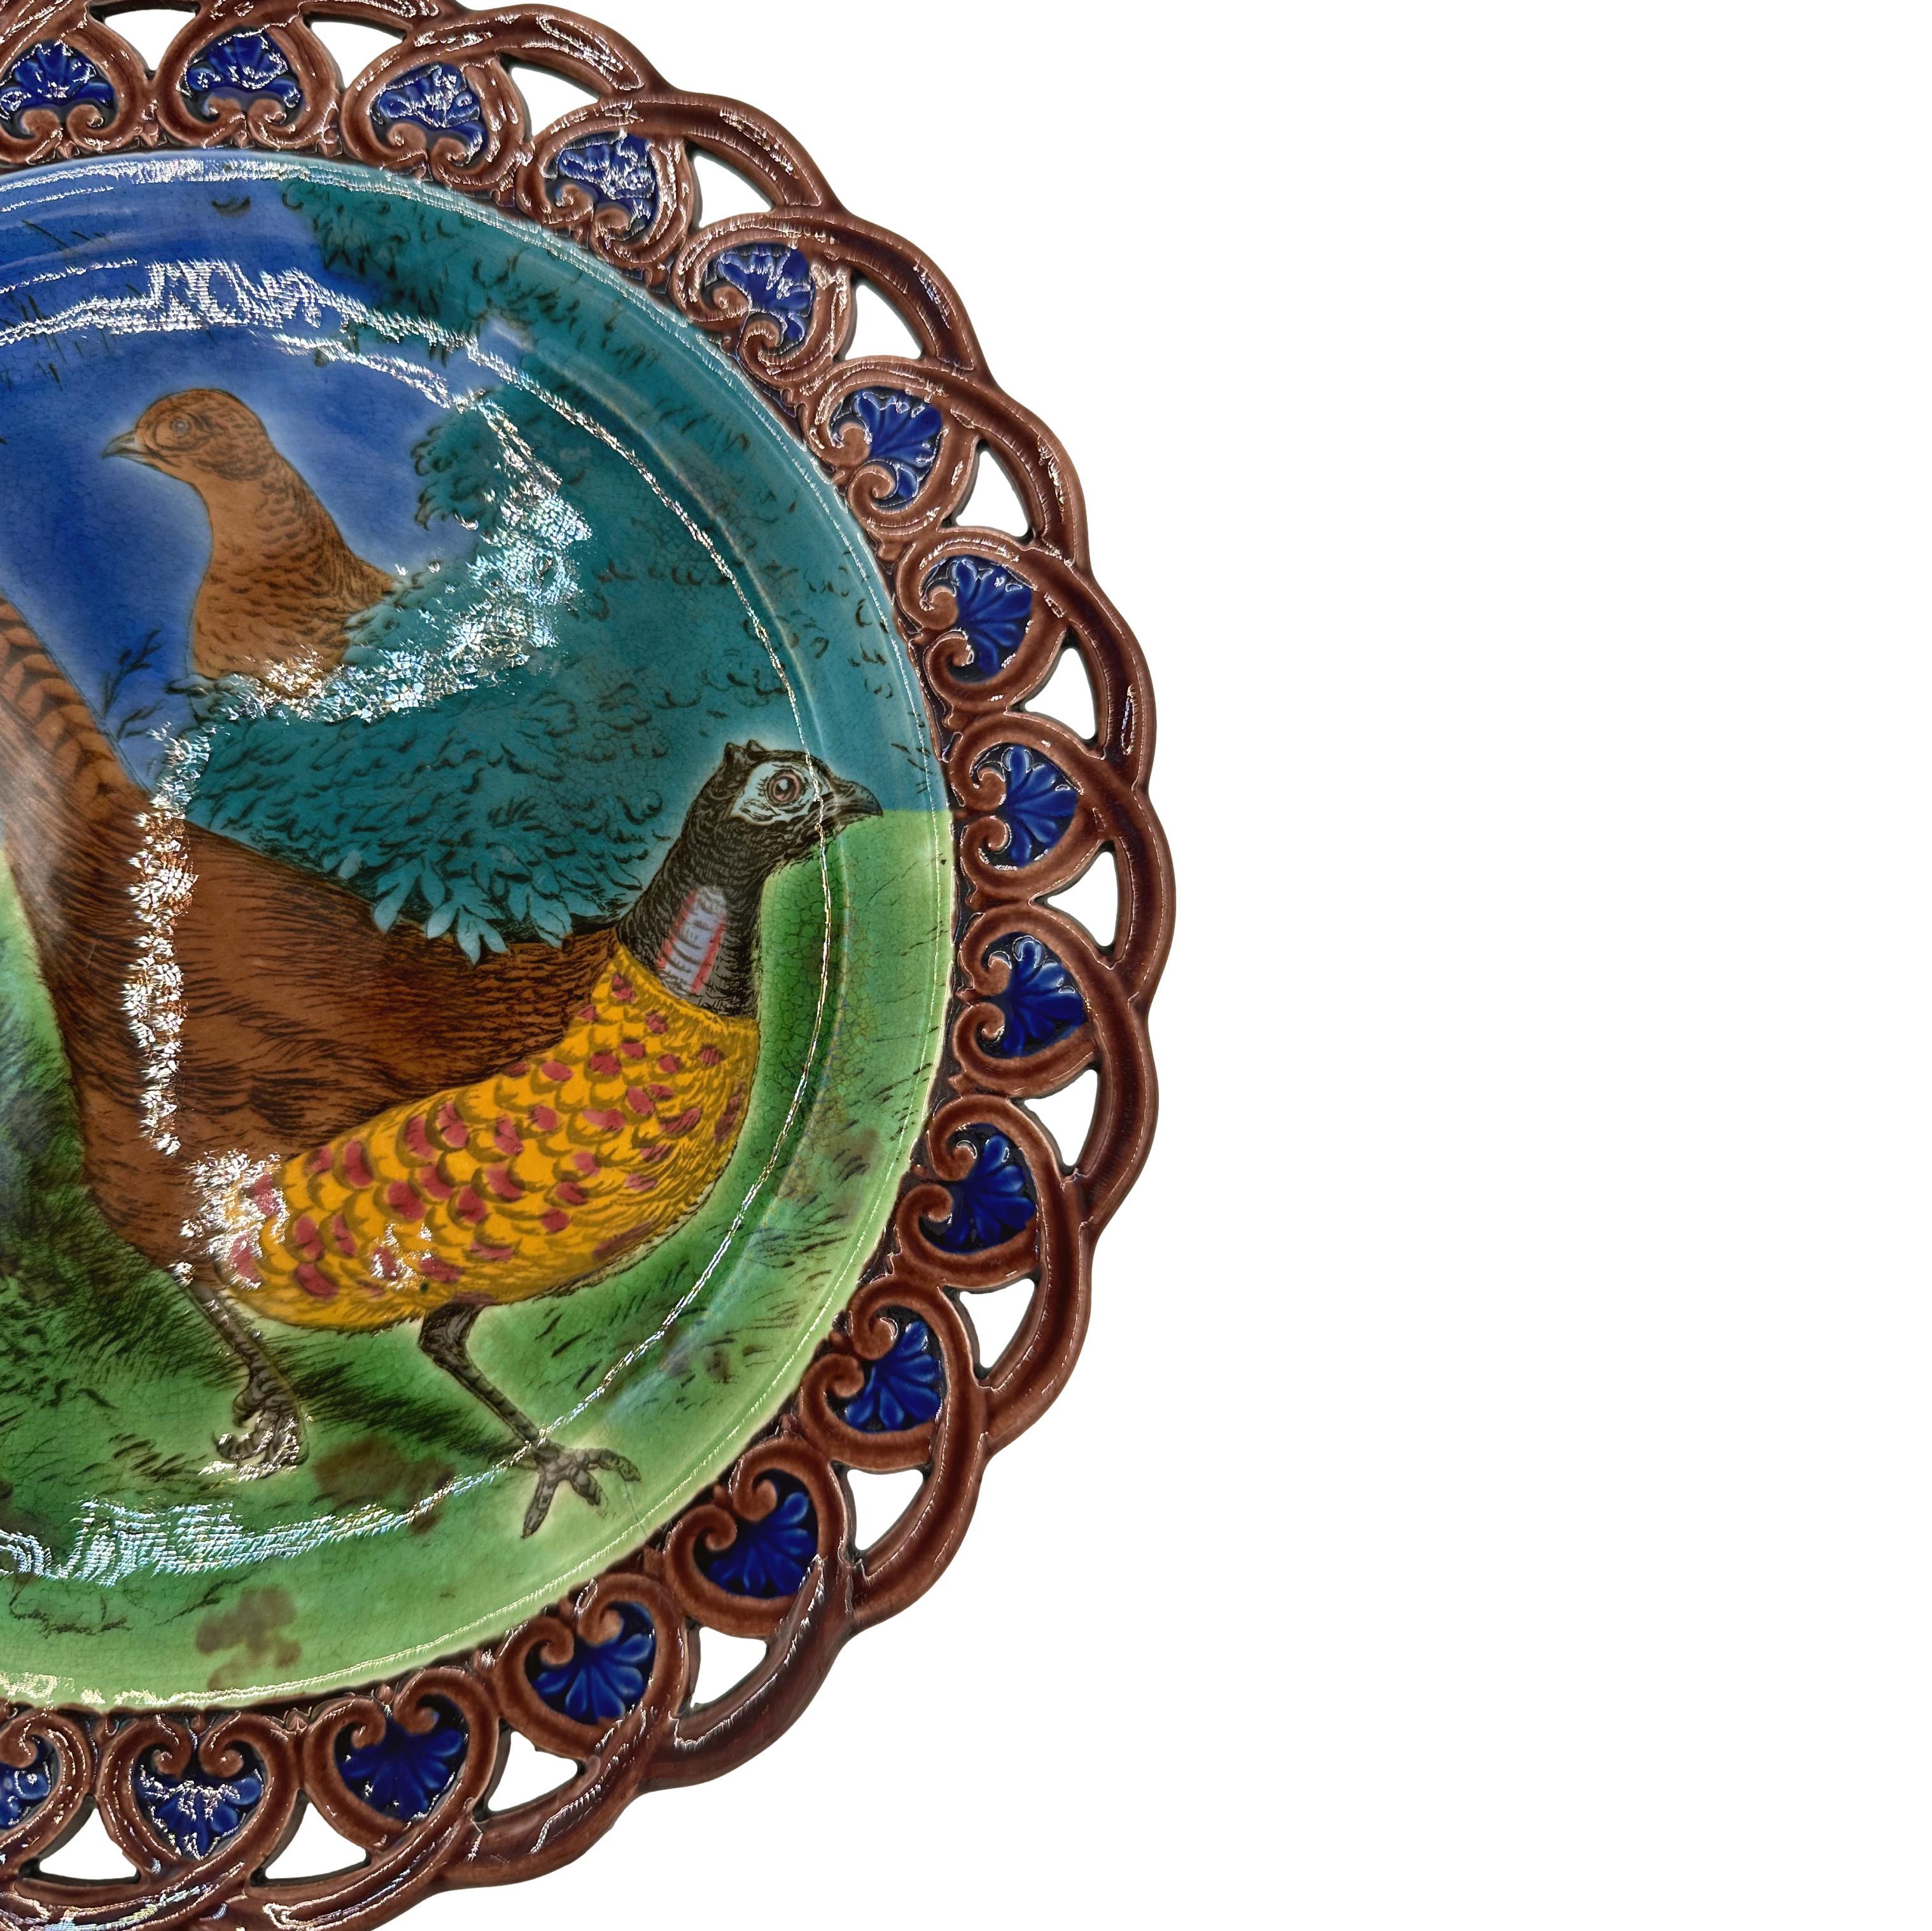 Molded A Wedgwood Majolica Pheasants Game Cabinet Plate, Reticulated, English, 1877